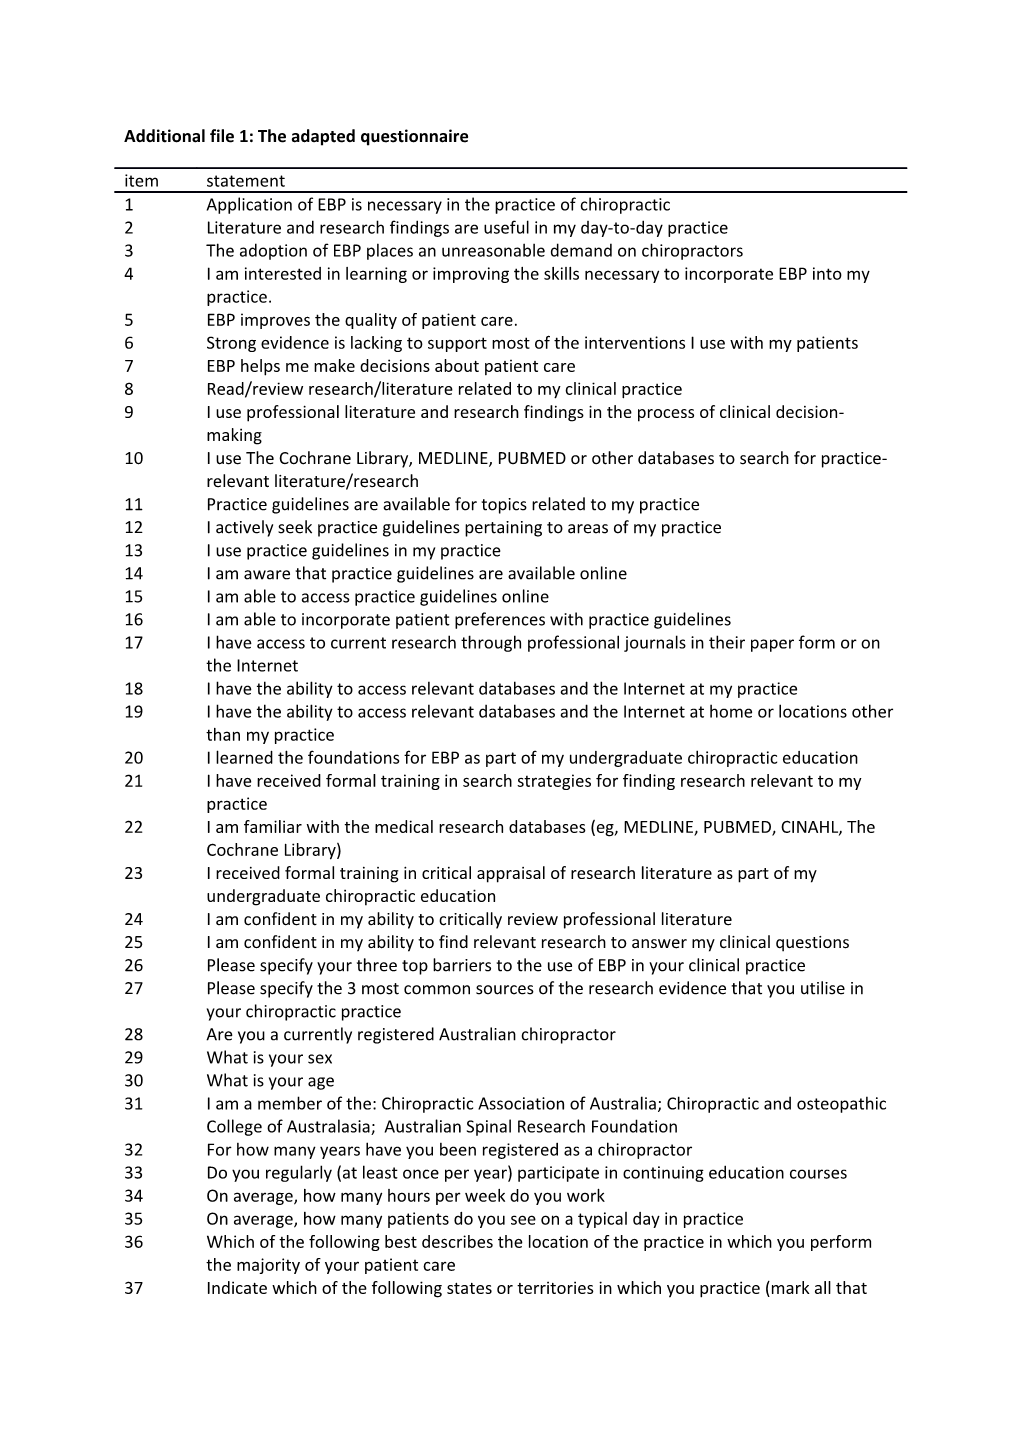 Additional File 1: the Adapted Questionnaire